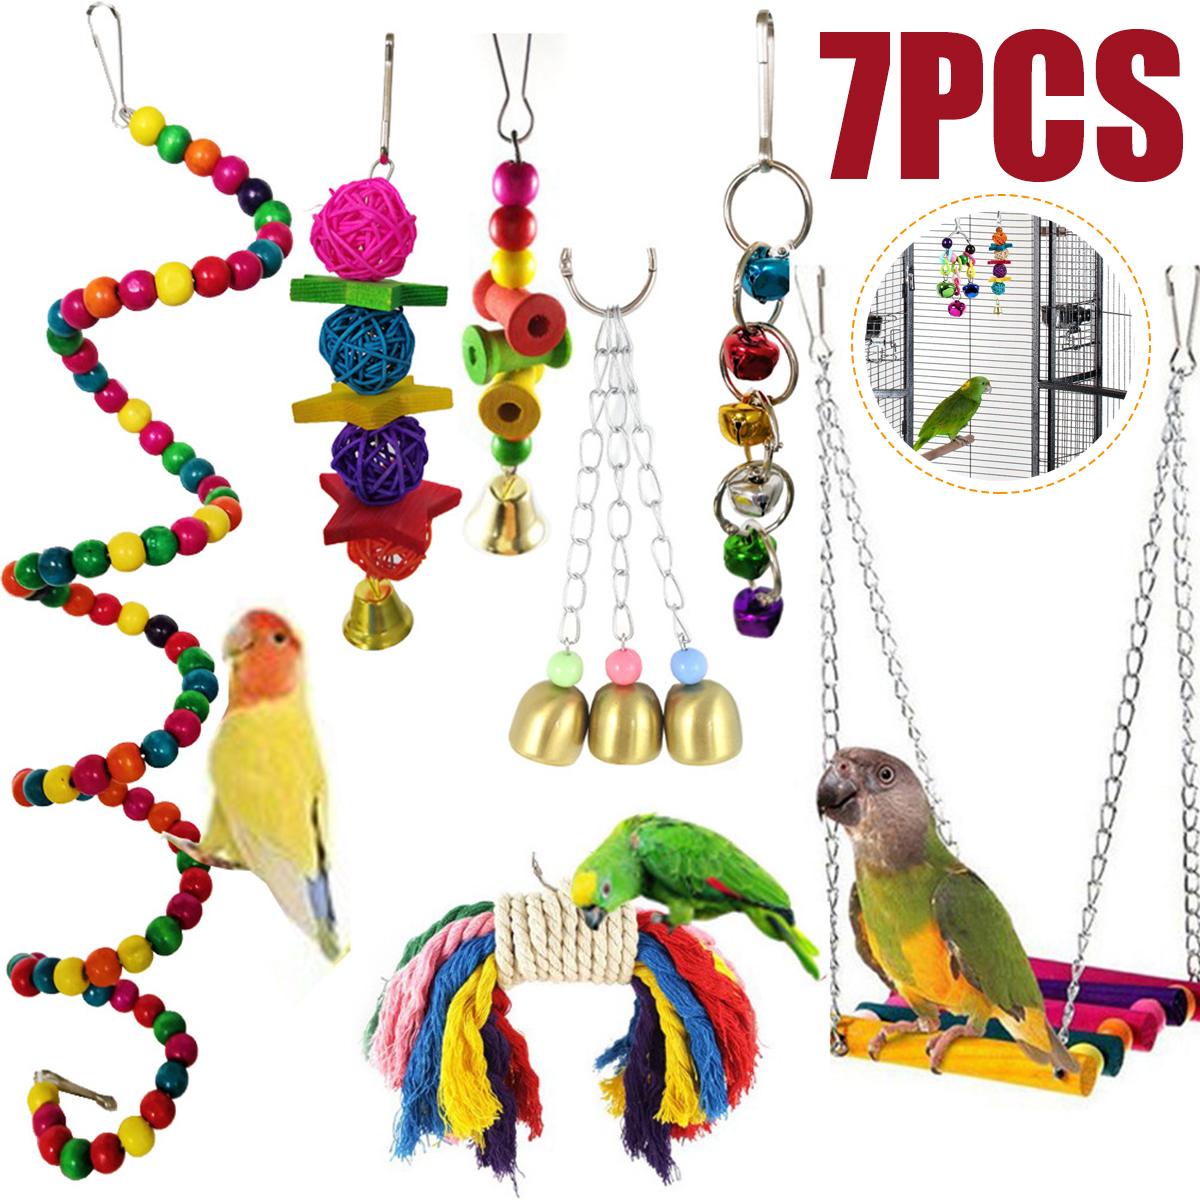 7PcsSet-Combination-Parrot-Toy-Bird-Articles-Parrot-Bite-Toy-Parrot-Funny-Swing-Ball-Bell-Standing-T-1703265-2